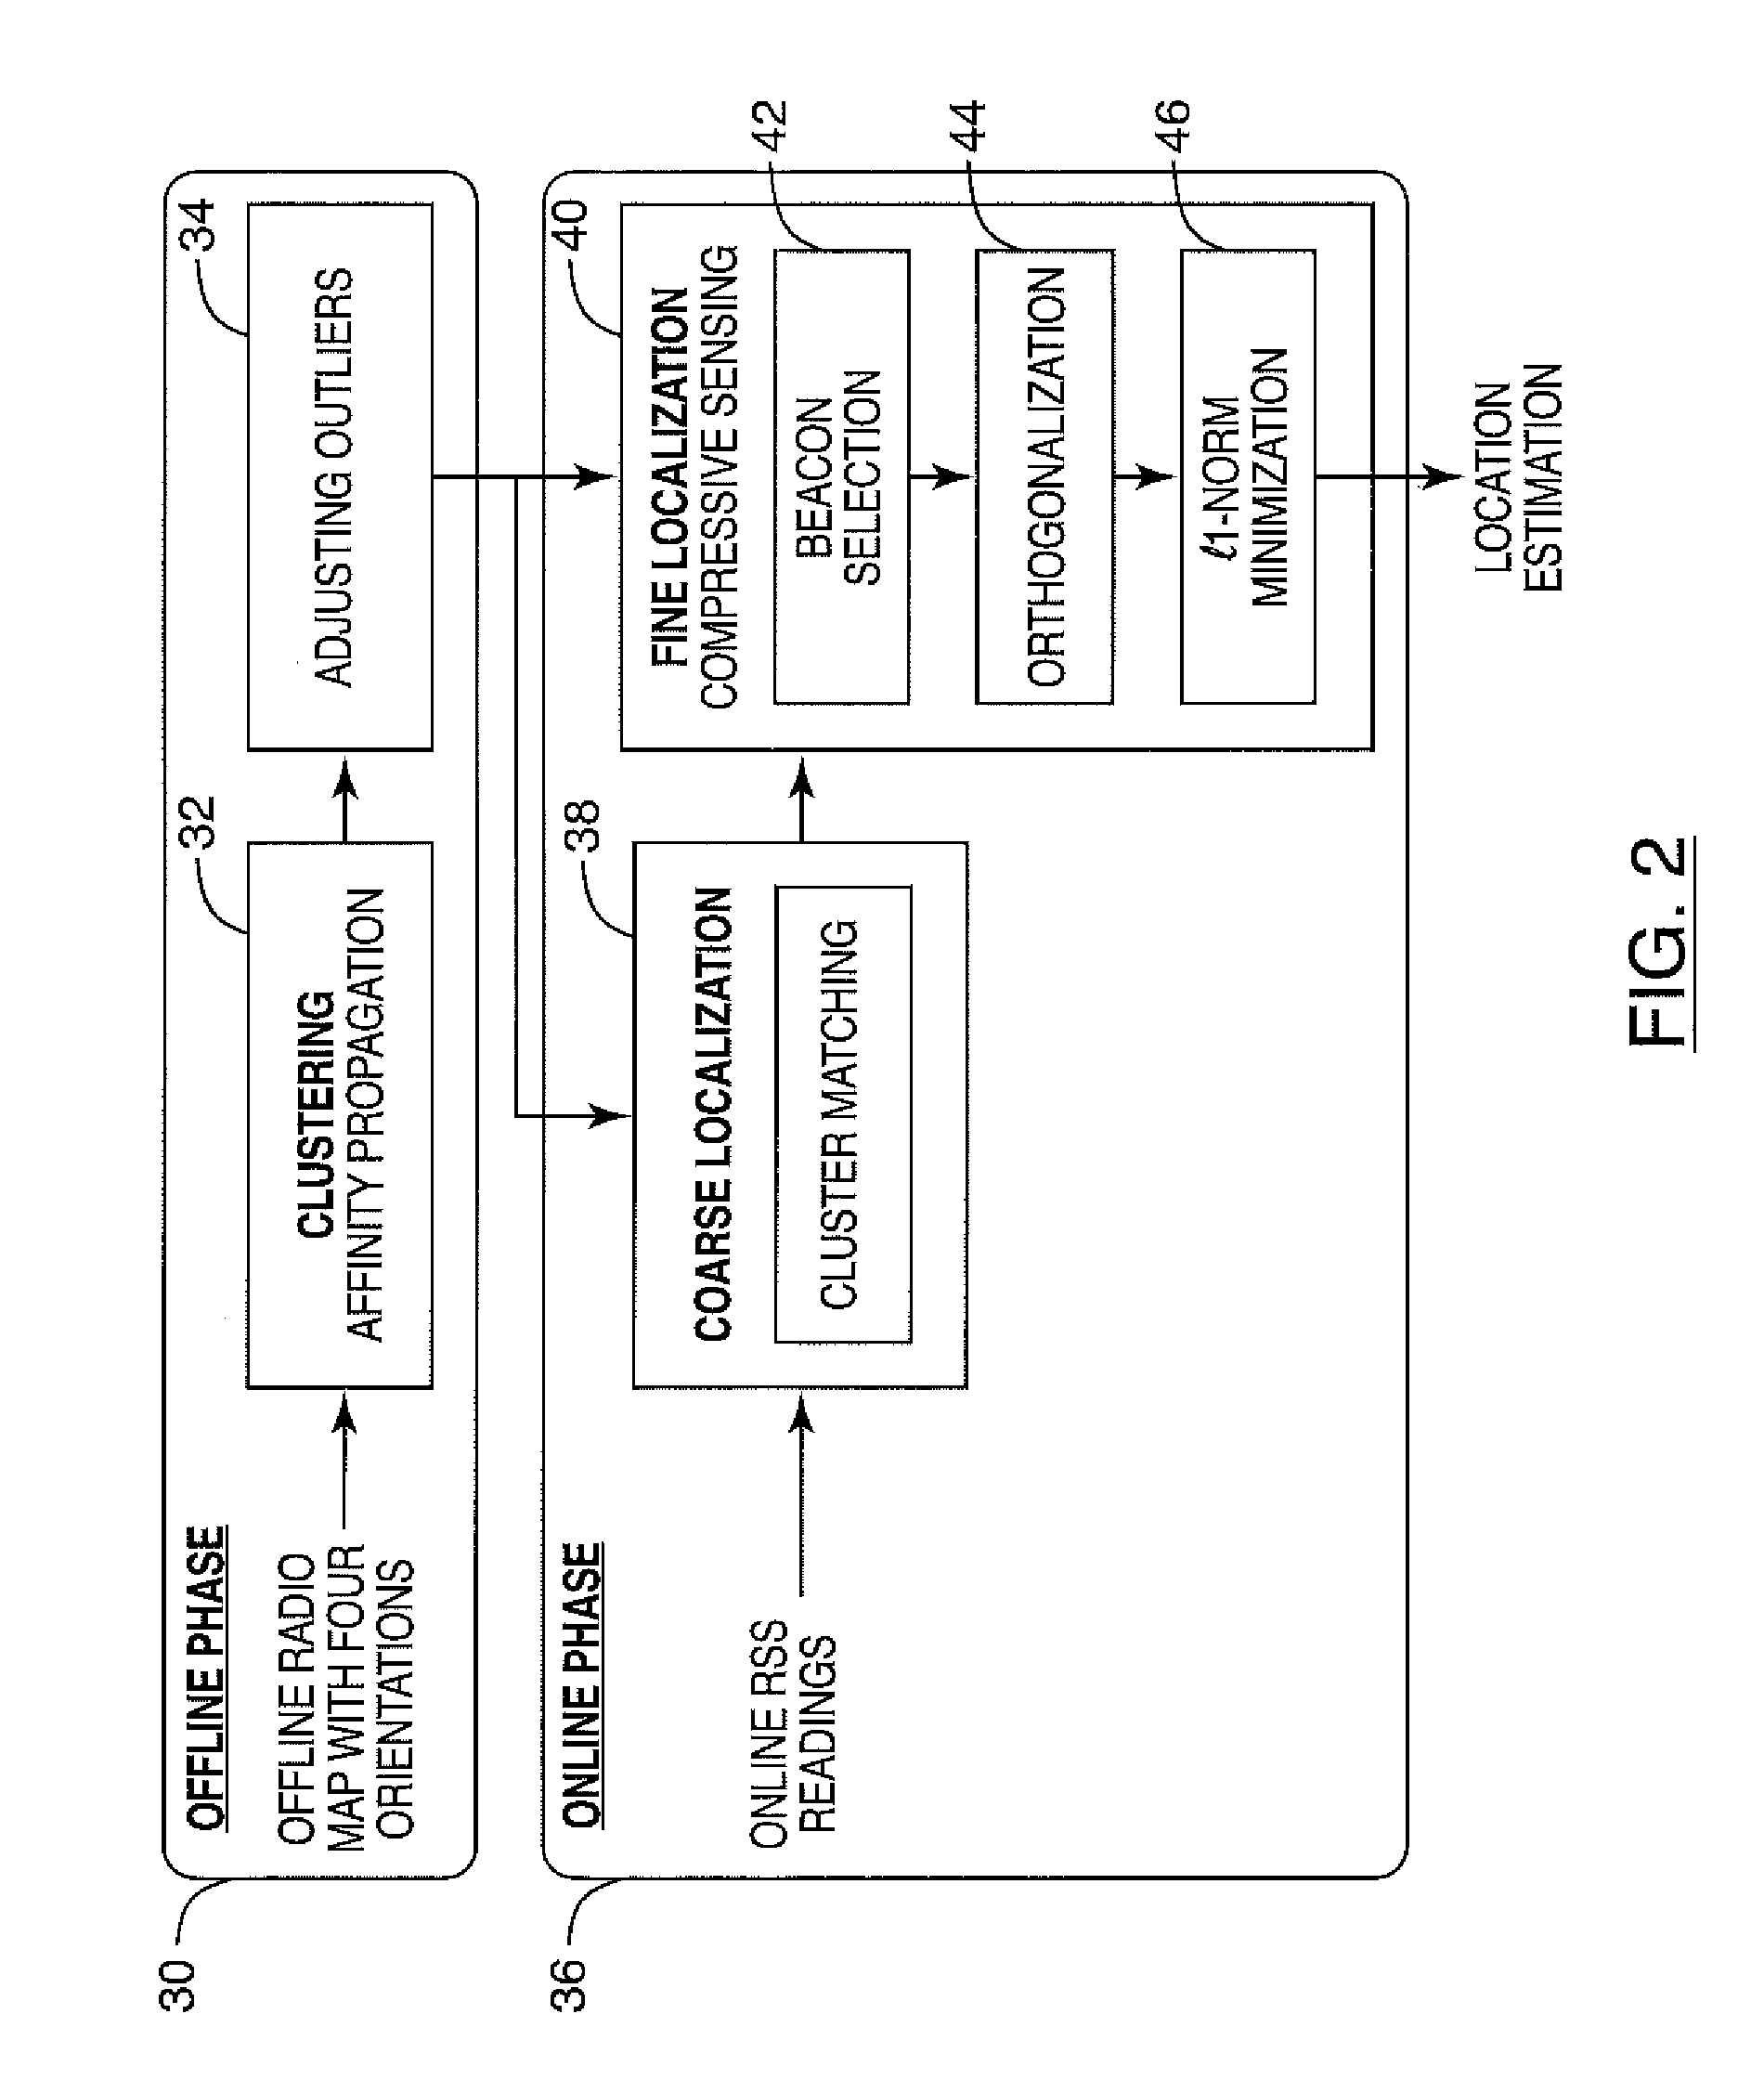 System, method and computer program for dynamic generation of a radio map